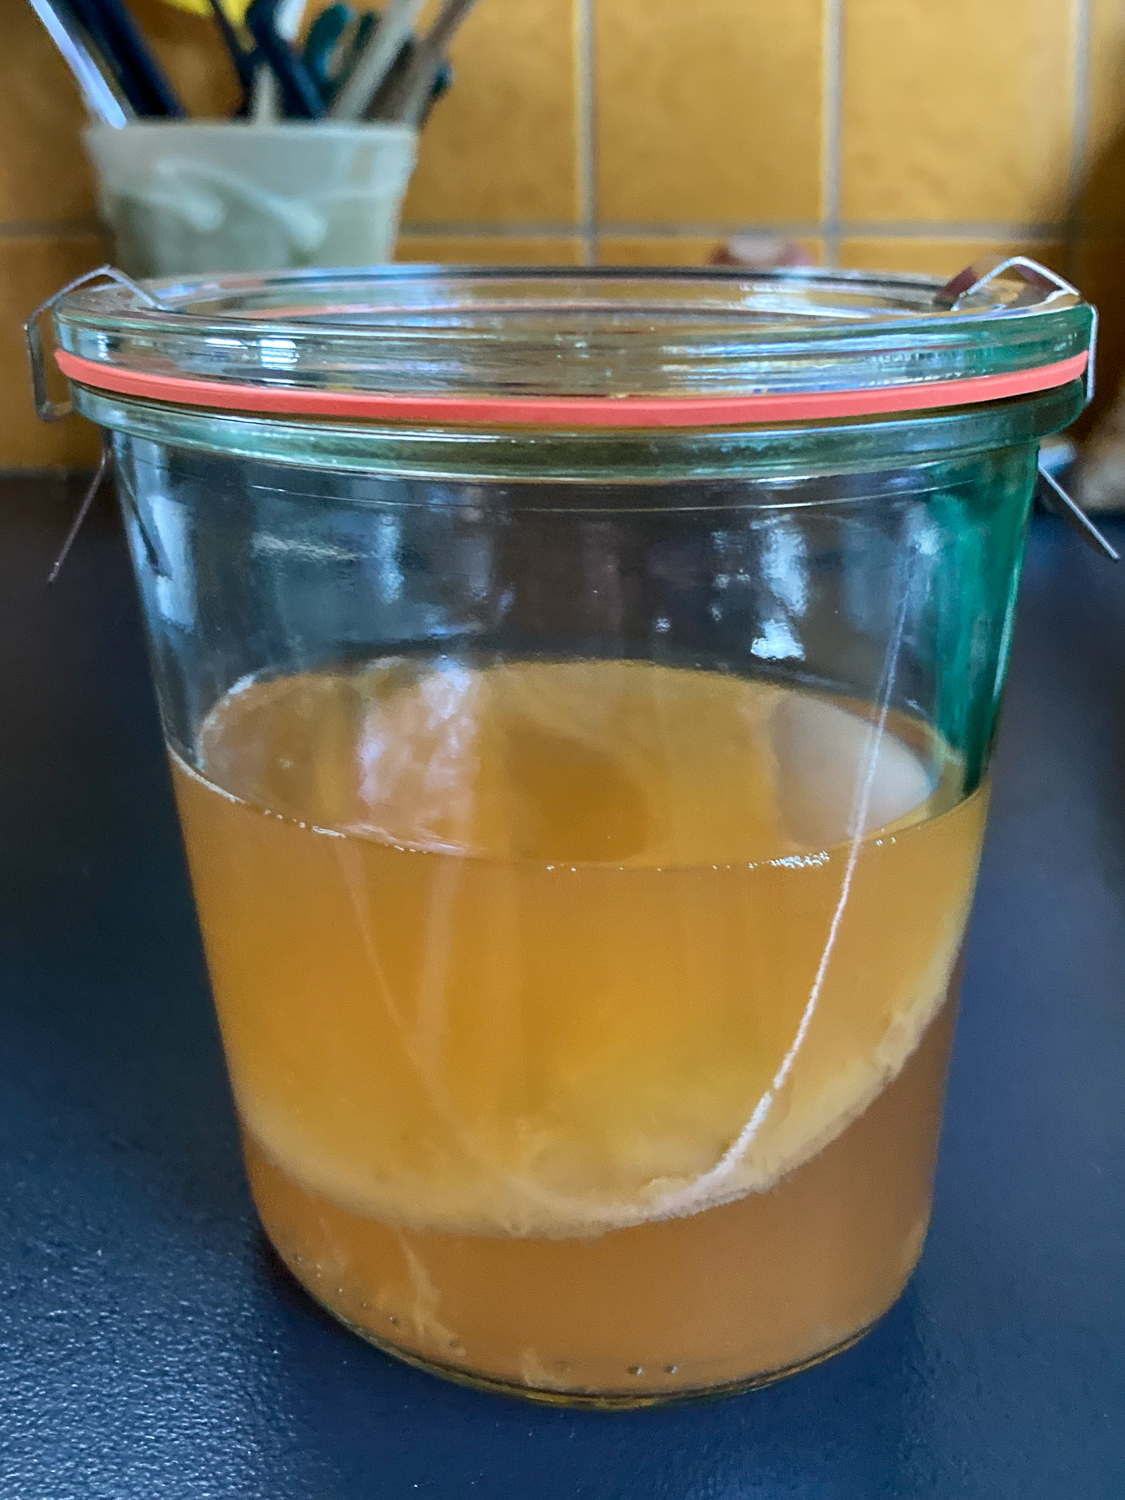 A scoby in a jar of yellow liquid